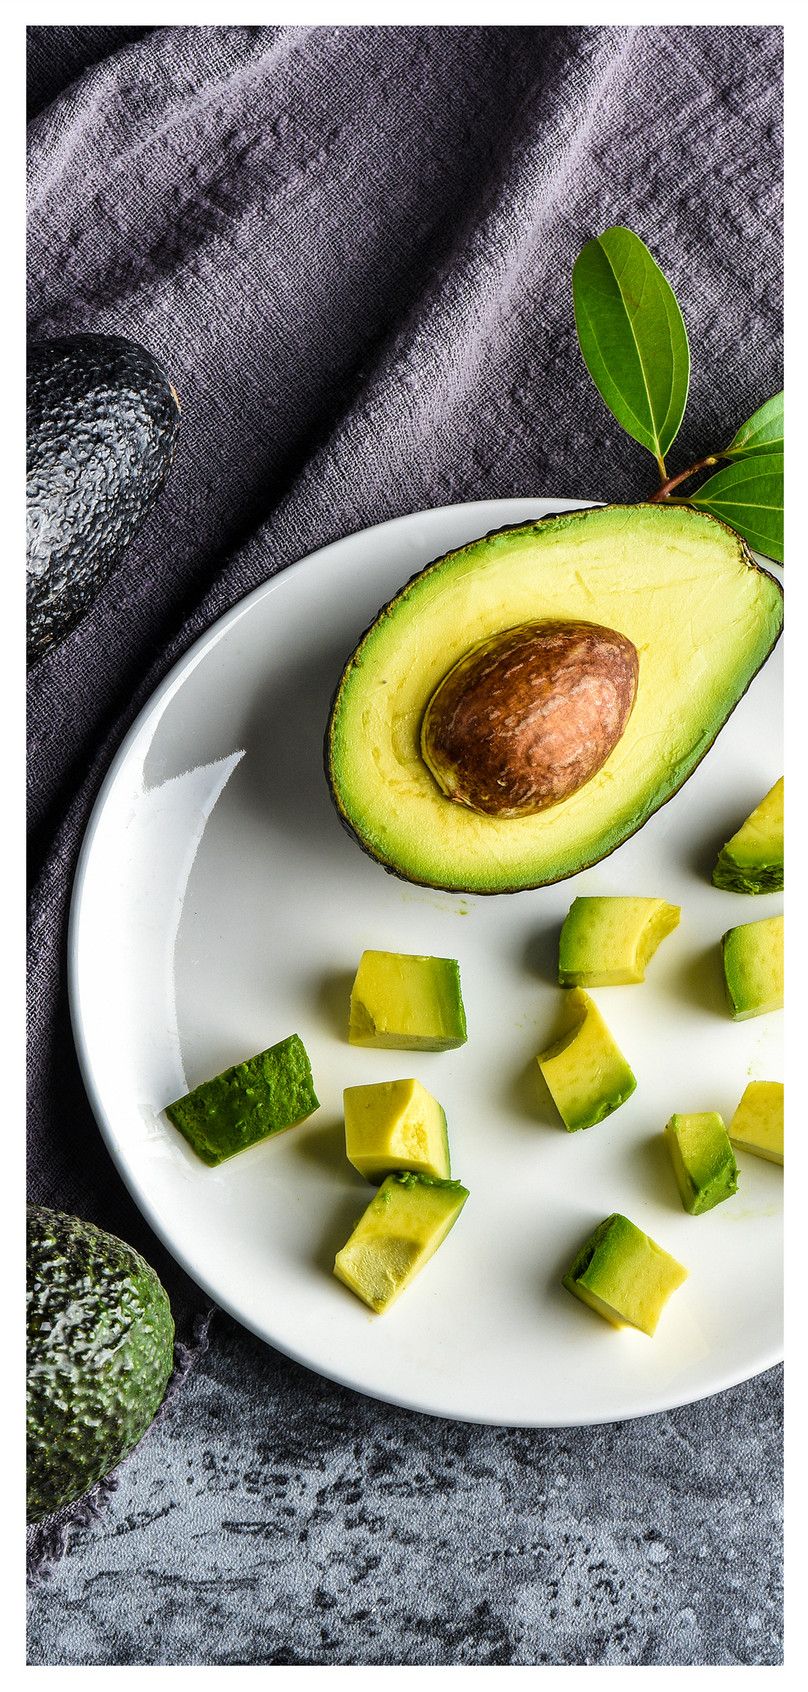 Avocado mobile phone wallpaper background image_picture free